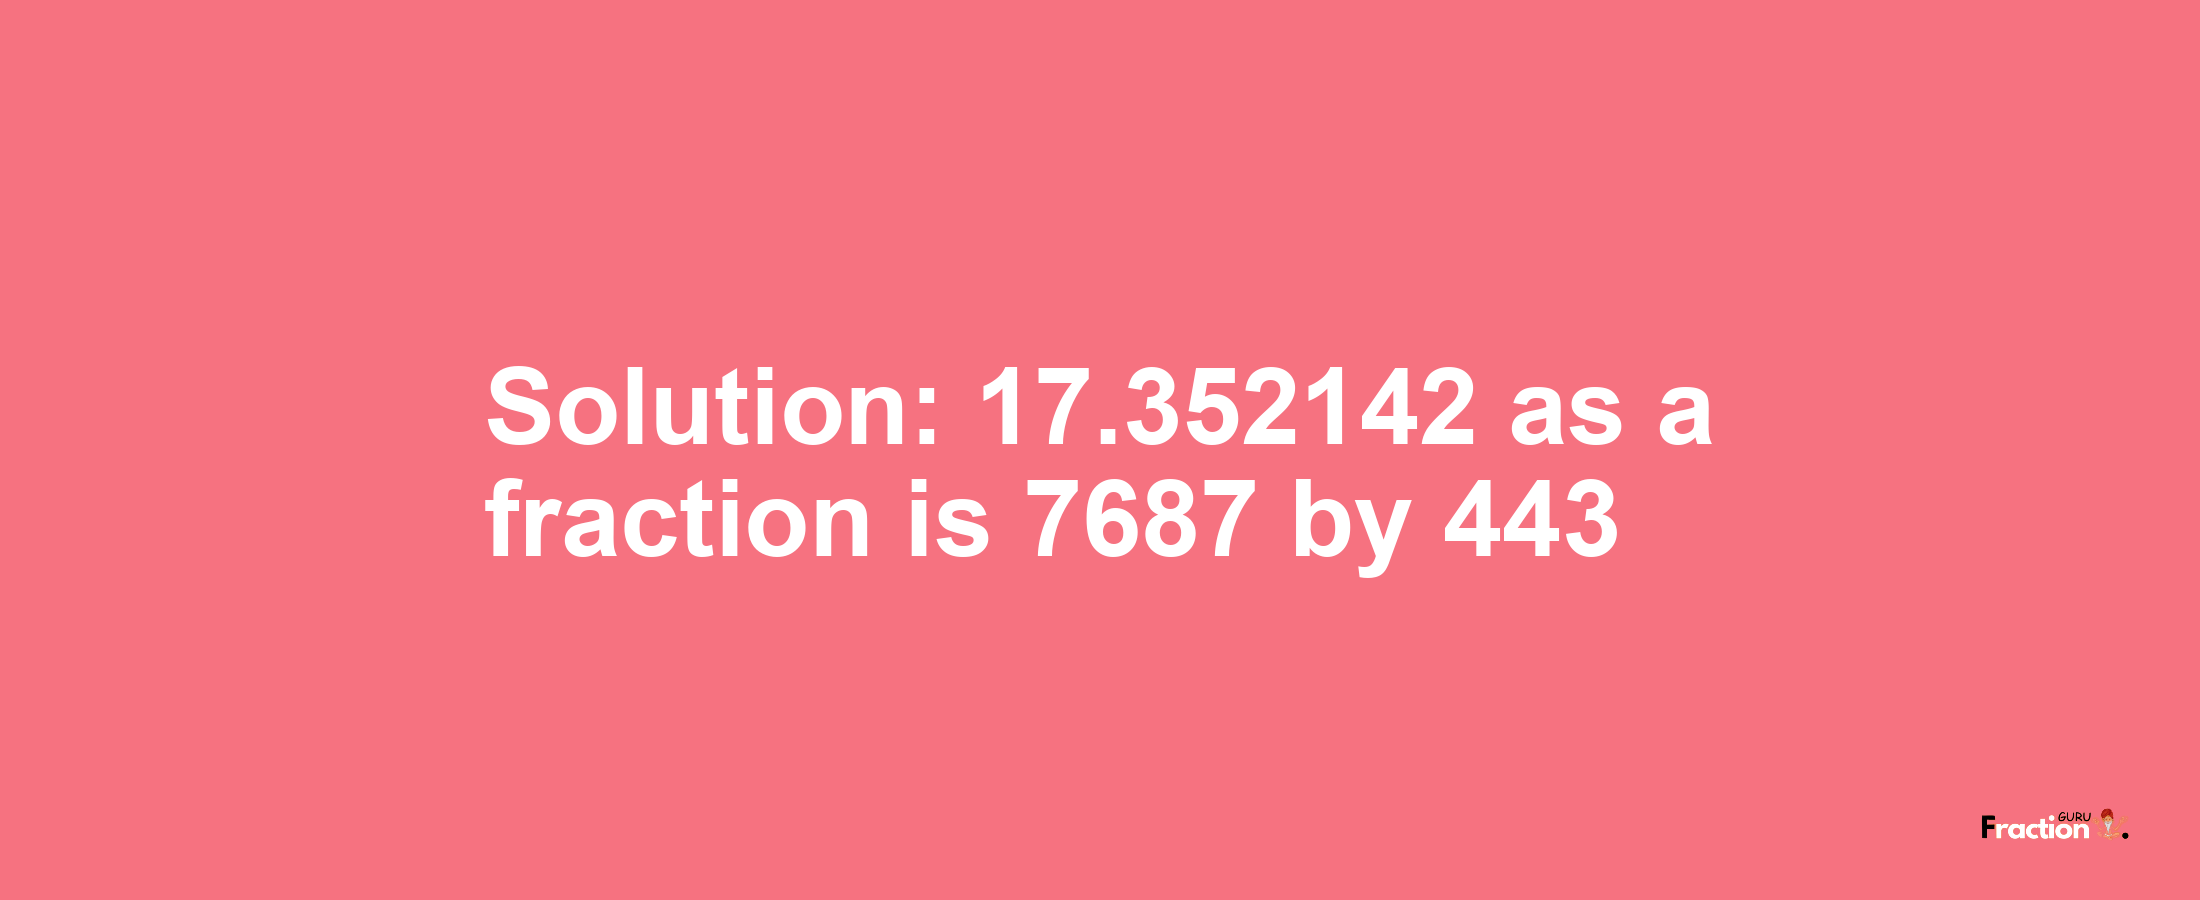 Solution:17.352142 as a fraction is 7687/443